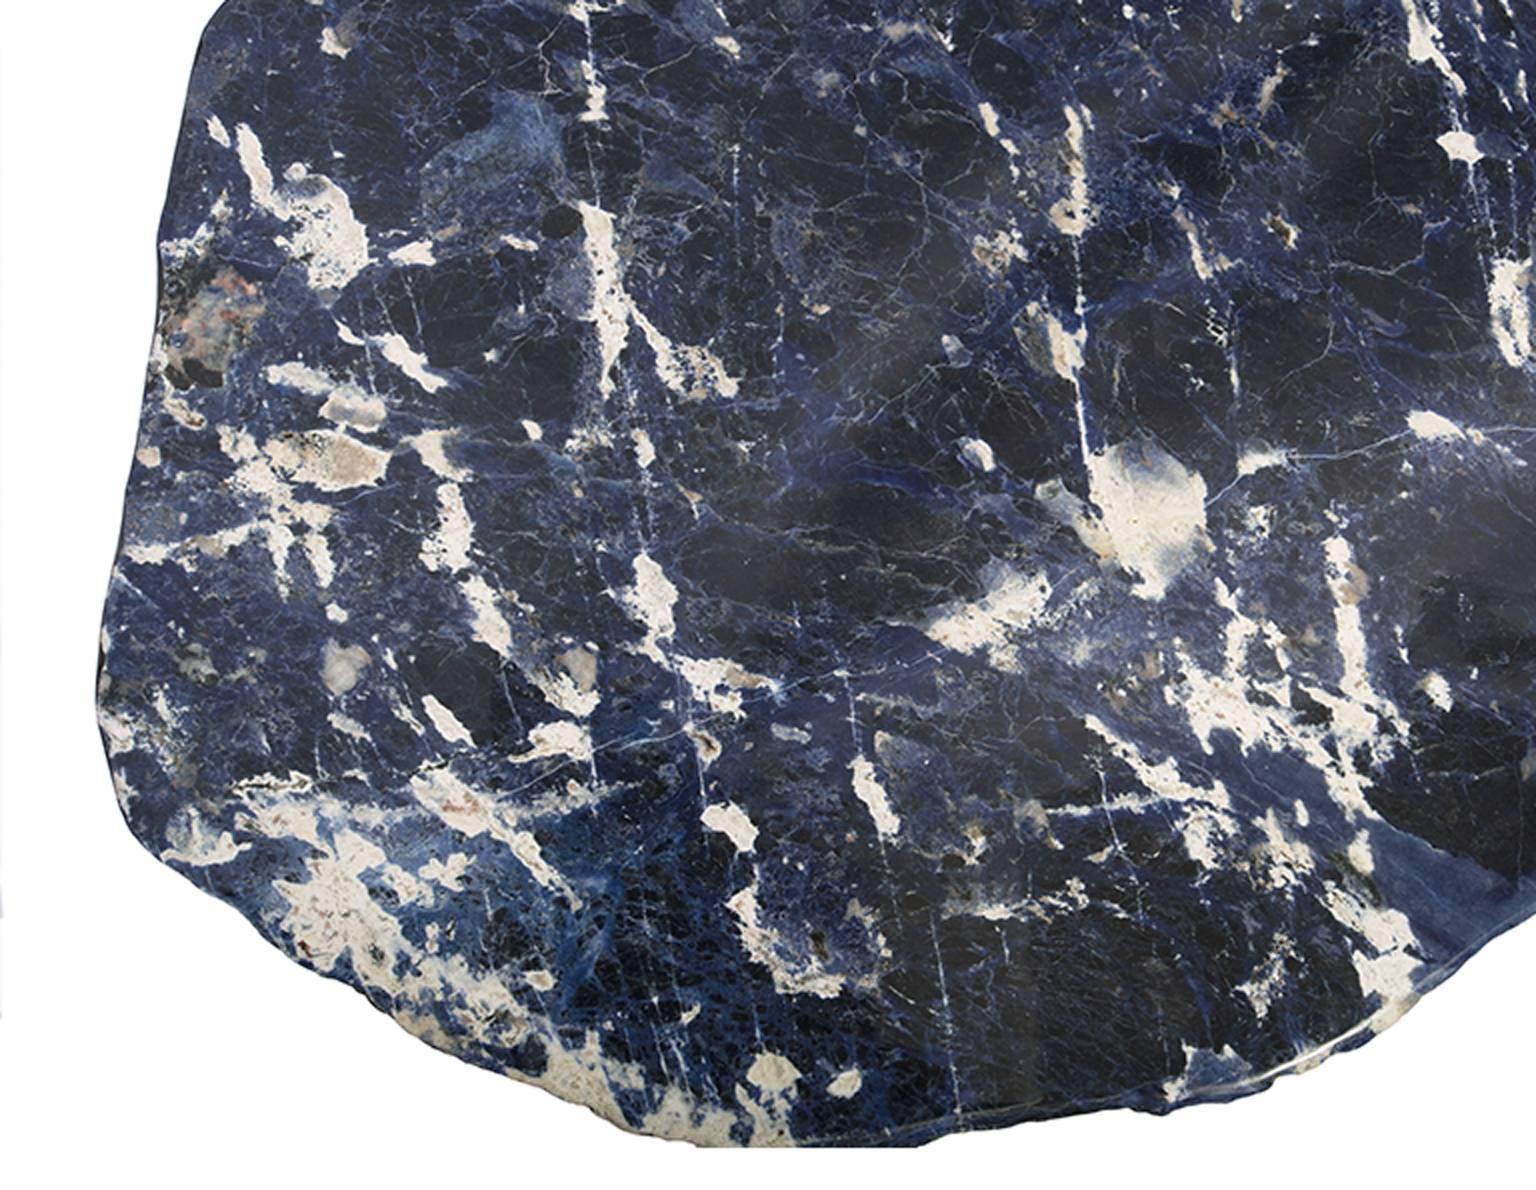 Sodalite slab from Brazil.
Sodalite o means “sodium stone”, because its chemical composition presents great amounts of sodium.
Sodalite is a very interesting mineral for collectors, since it is not easy to find well-crystalized specimens in nature